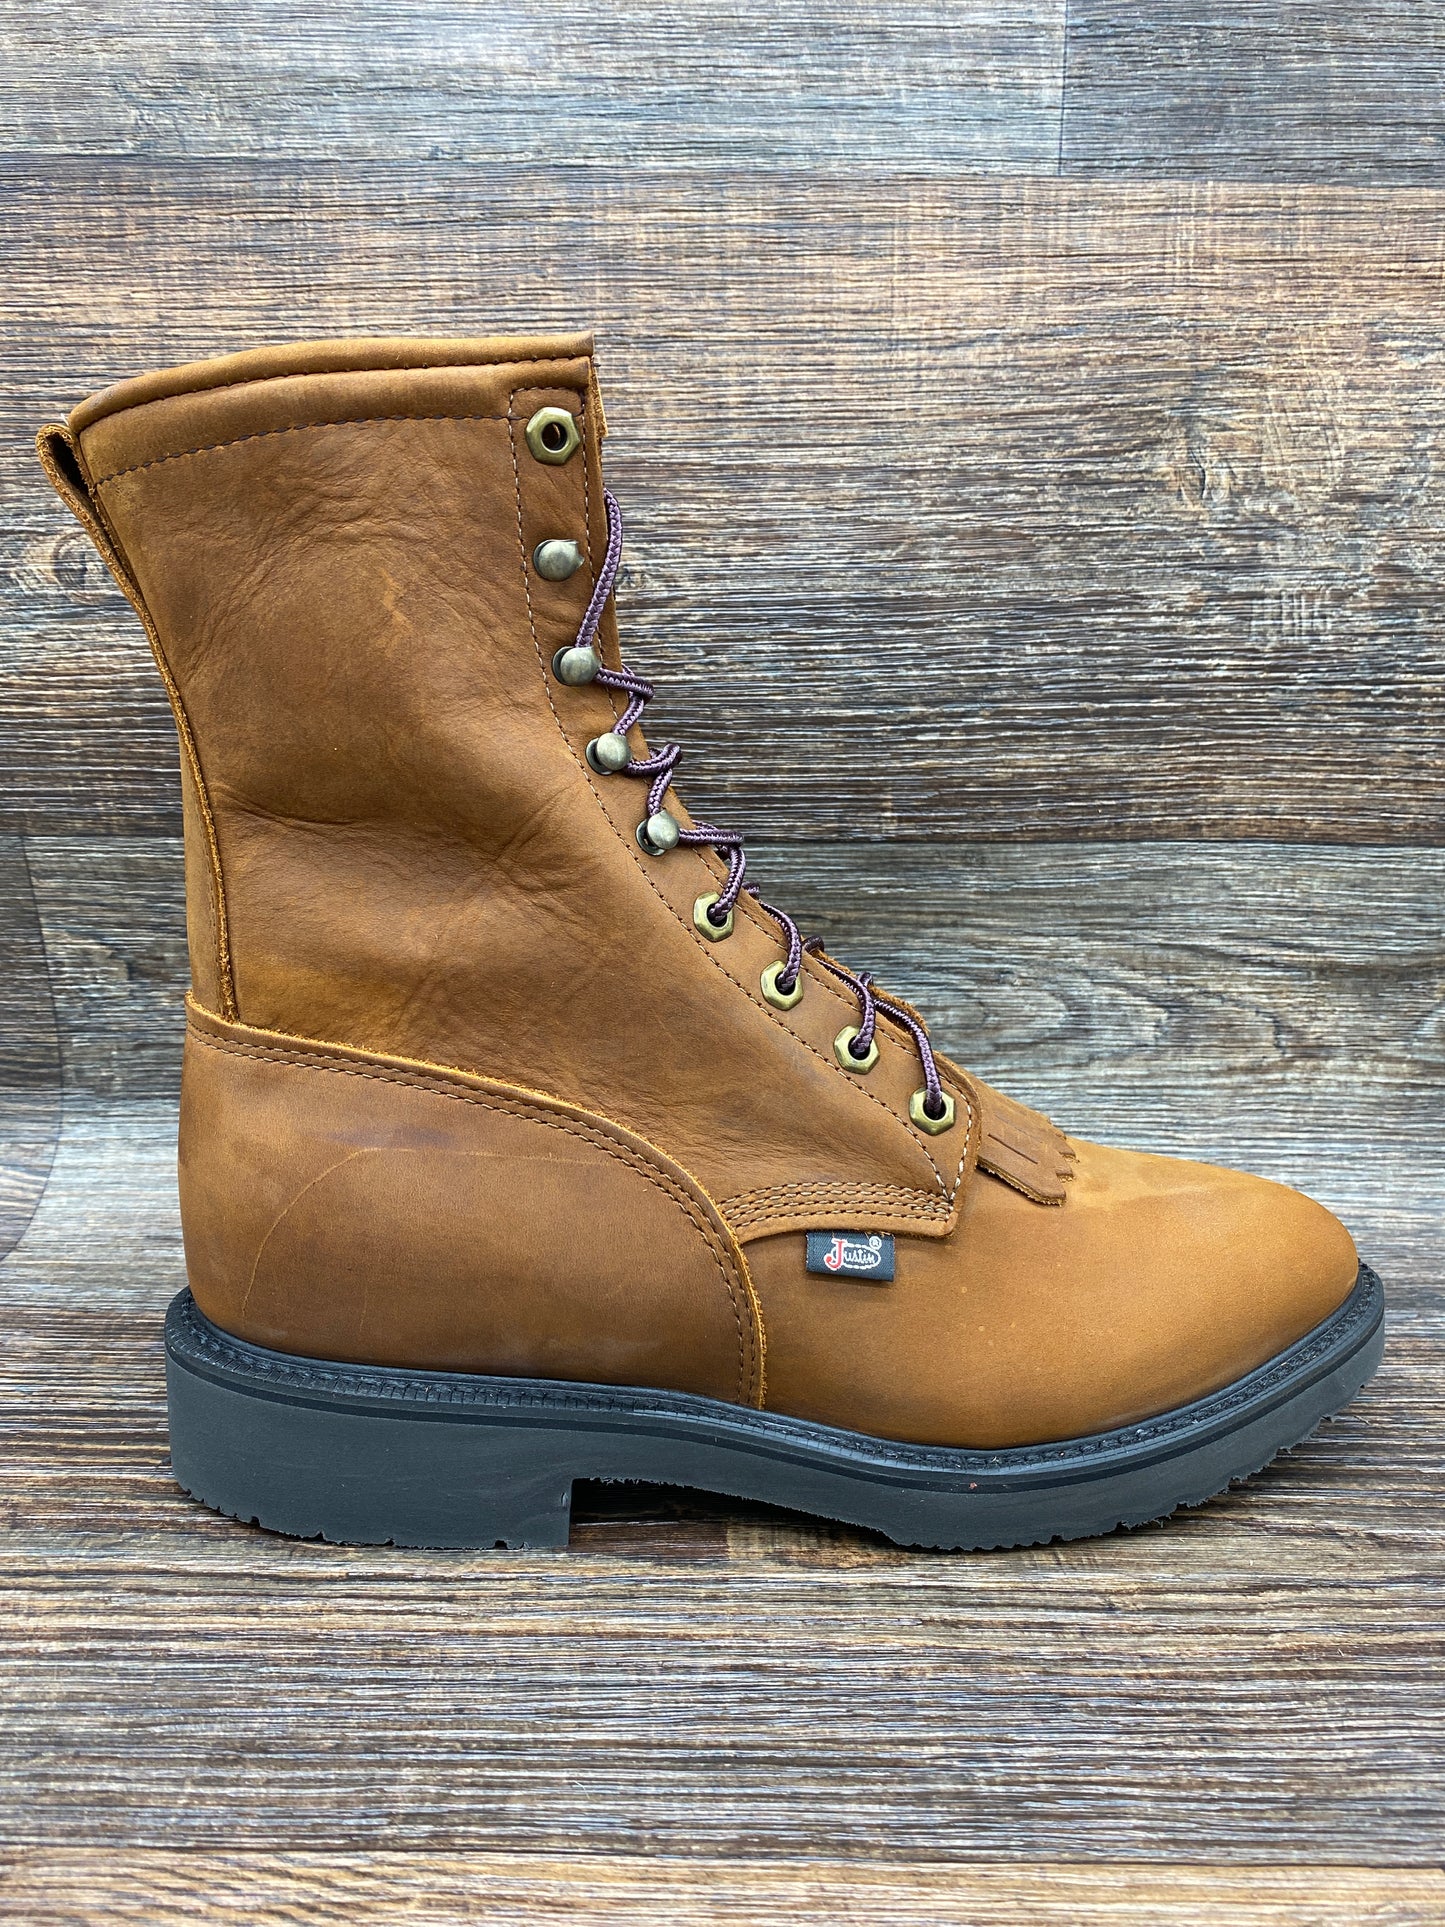 760 Men's Soft Toe 8 inch Lace Up Work Boot by Justin